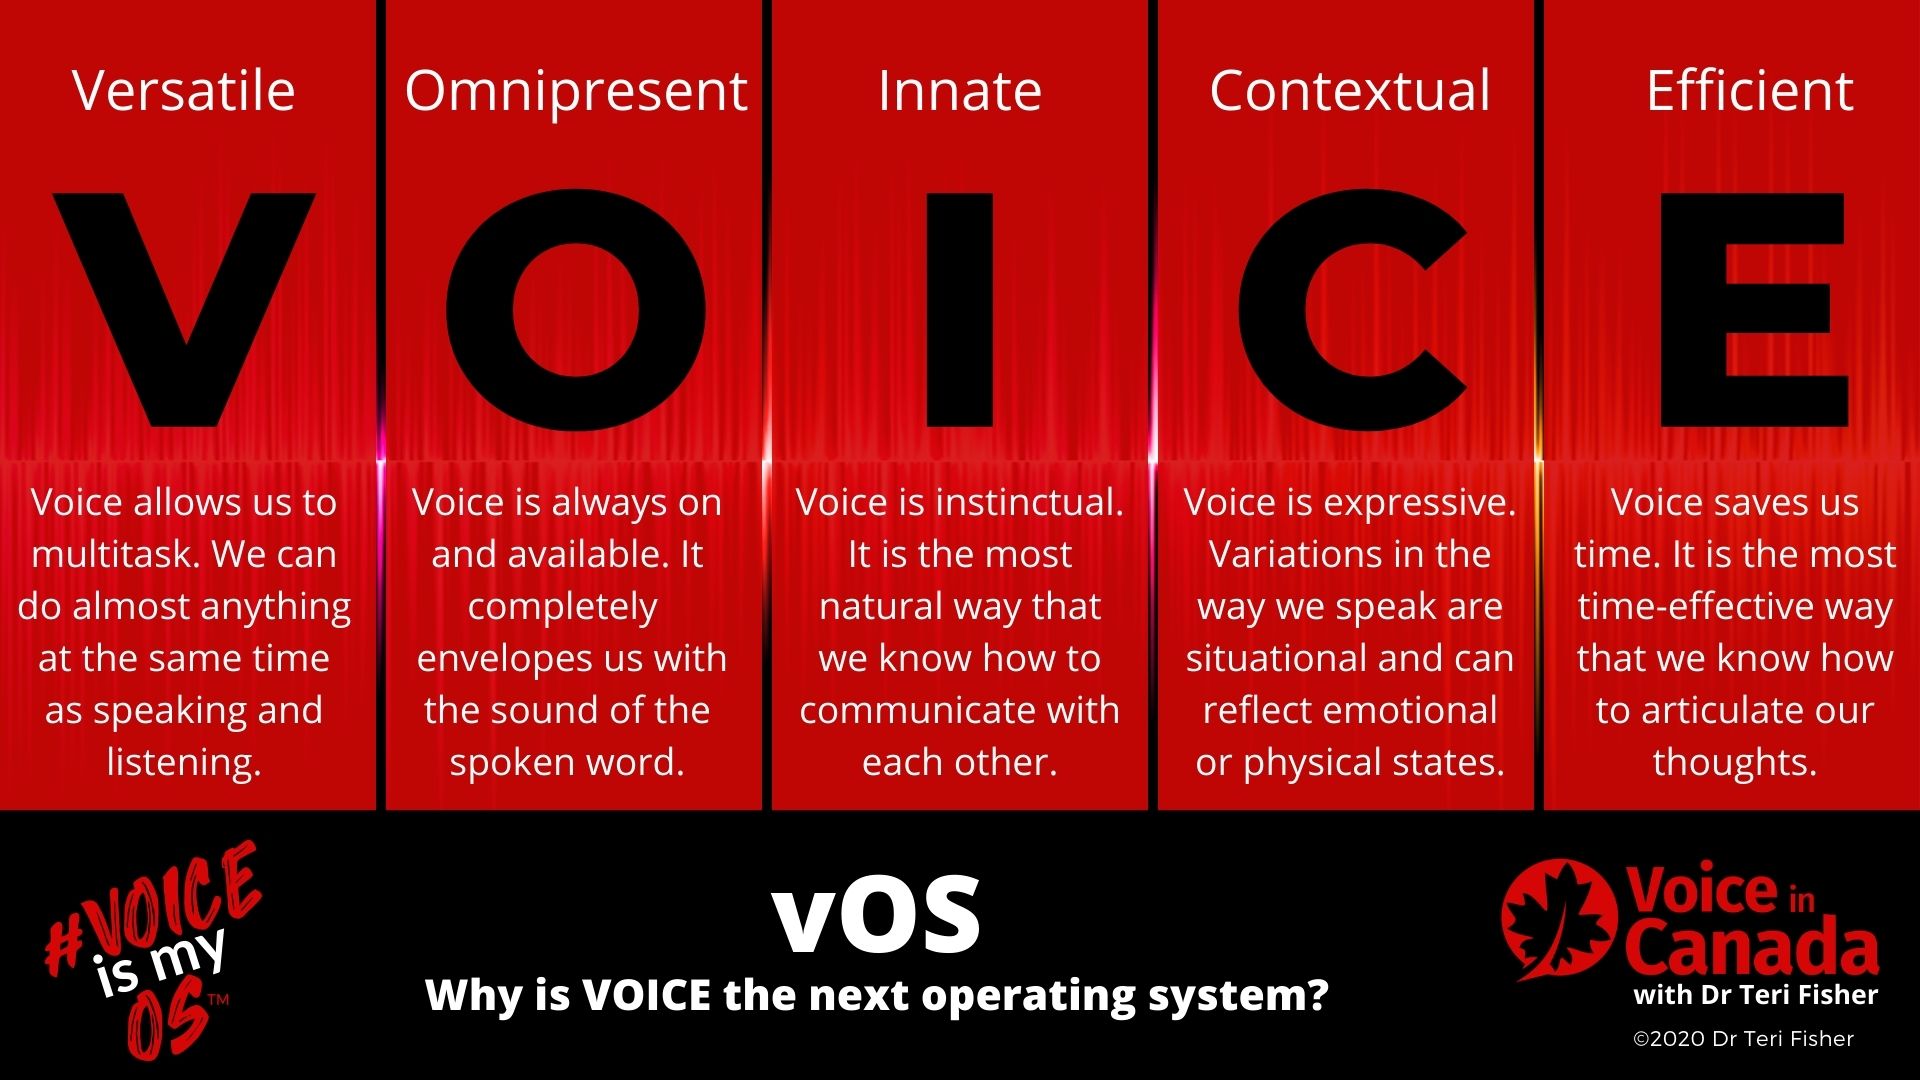 VOICE is my OS Infographic (1)